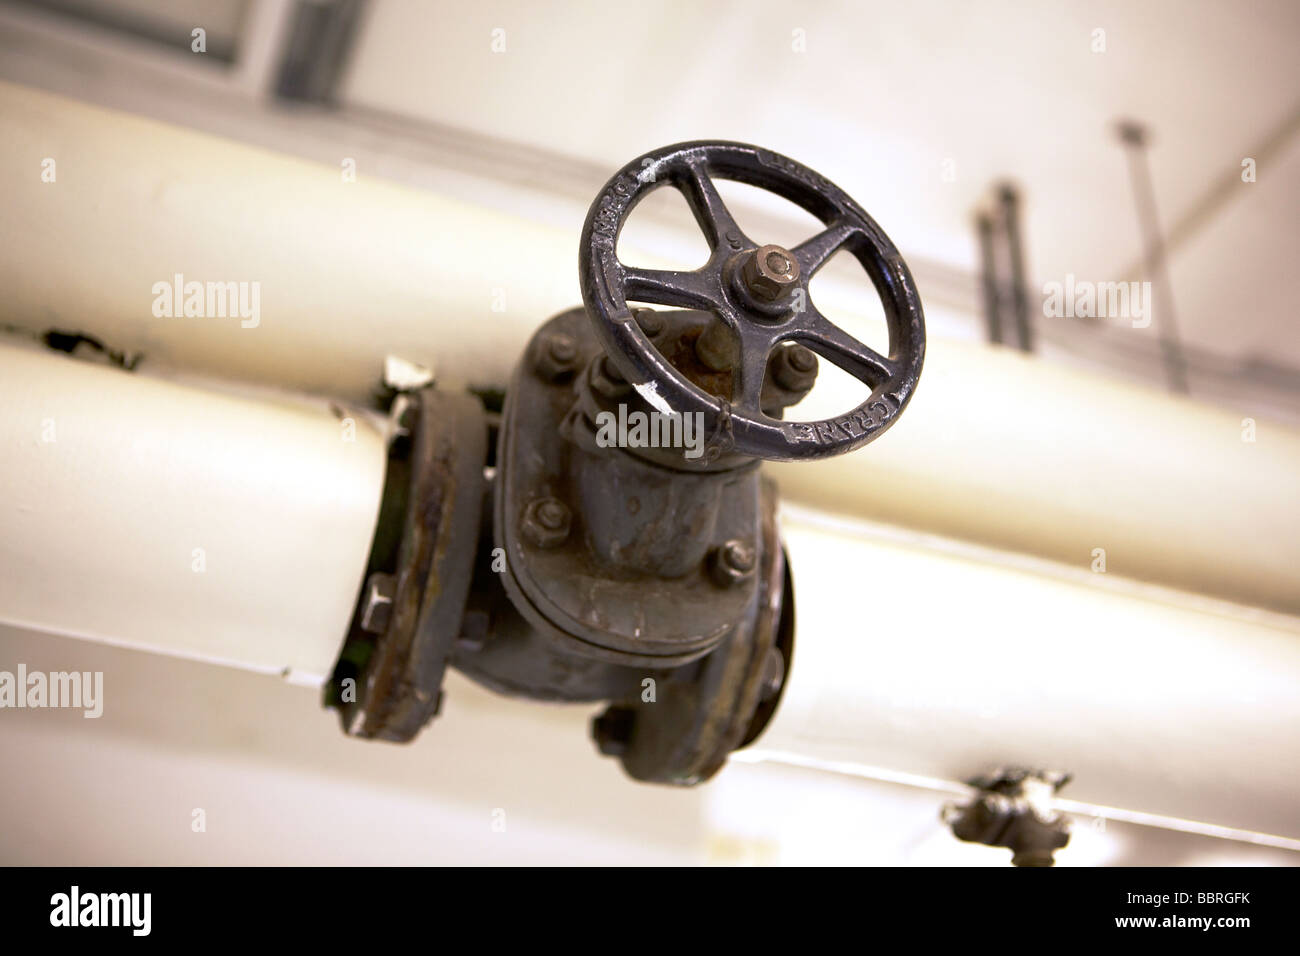 LARGE CAST IRON VALVE FOR WATER Stock Photo